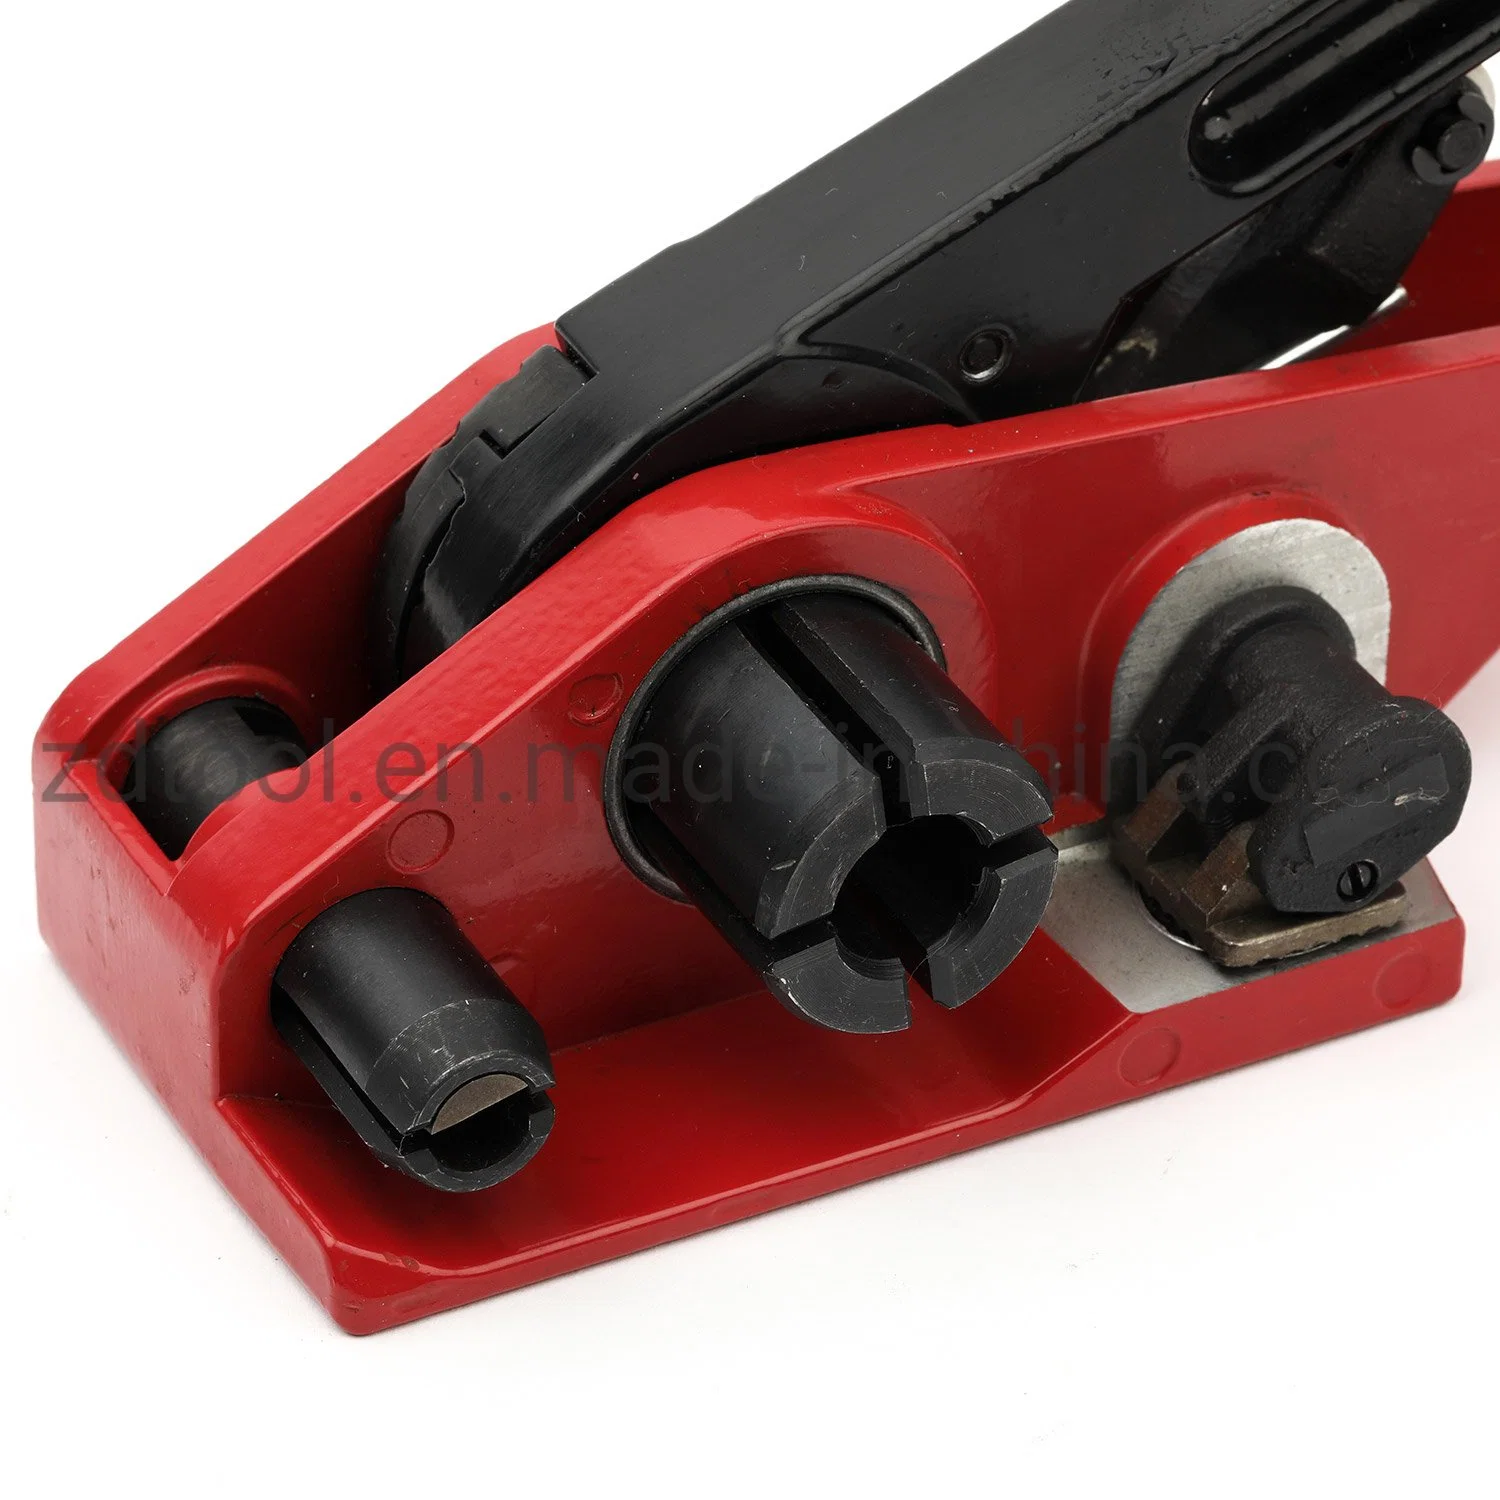 Small Machine Strap Tensioner 13-19mm Manual Strapping Tool H21